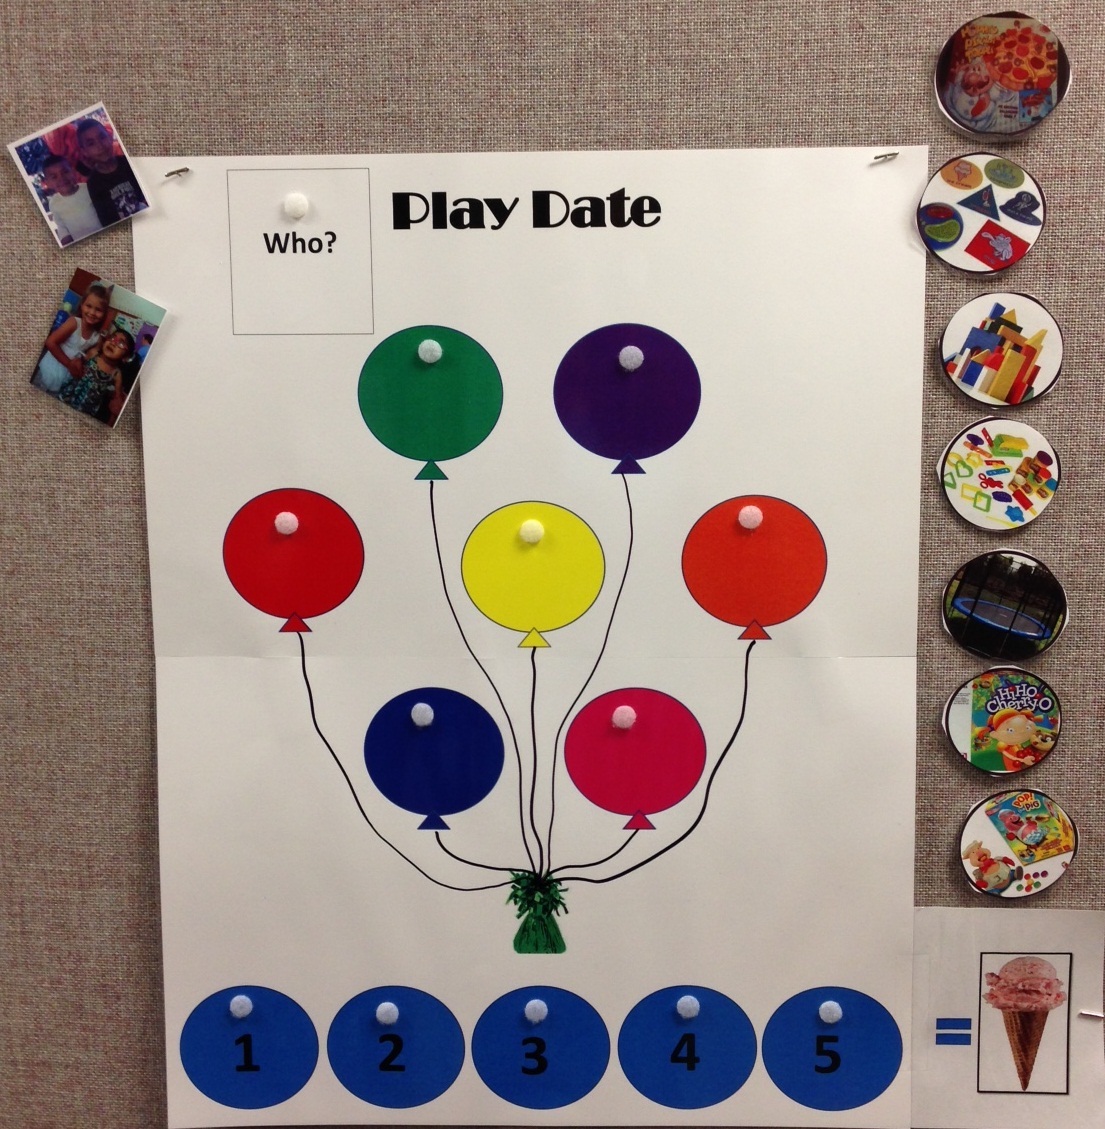 Play Date poster with balloons to hold pictures of activities that children on a play date can choose to do. Along the bottom are circles to place the activities in the order the children choose. On the left are pictures of the children who will be playing.